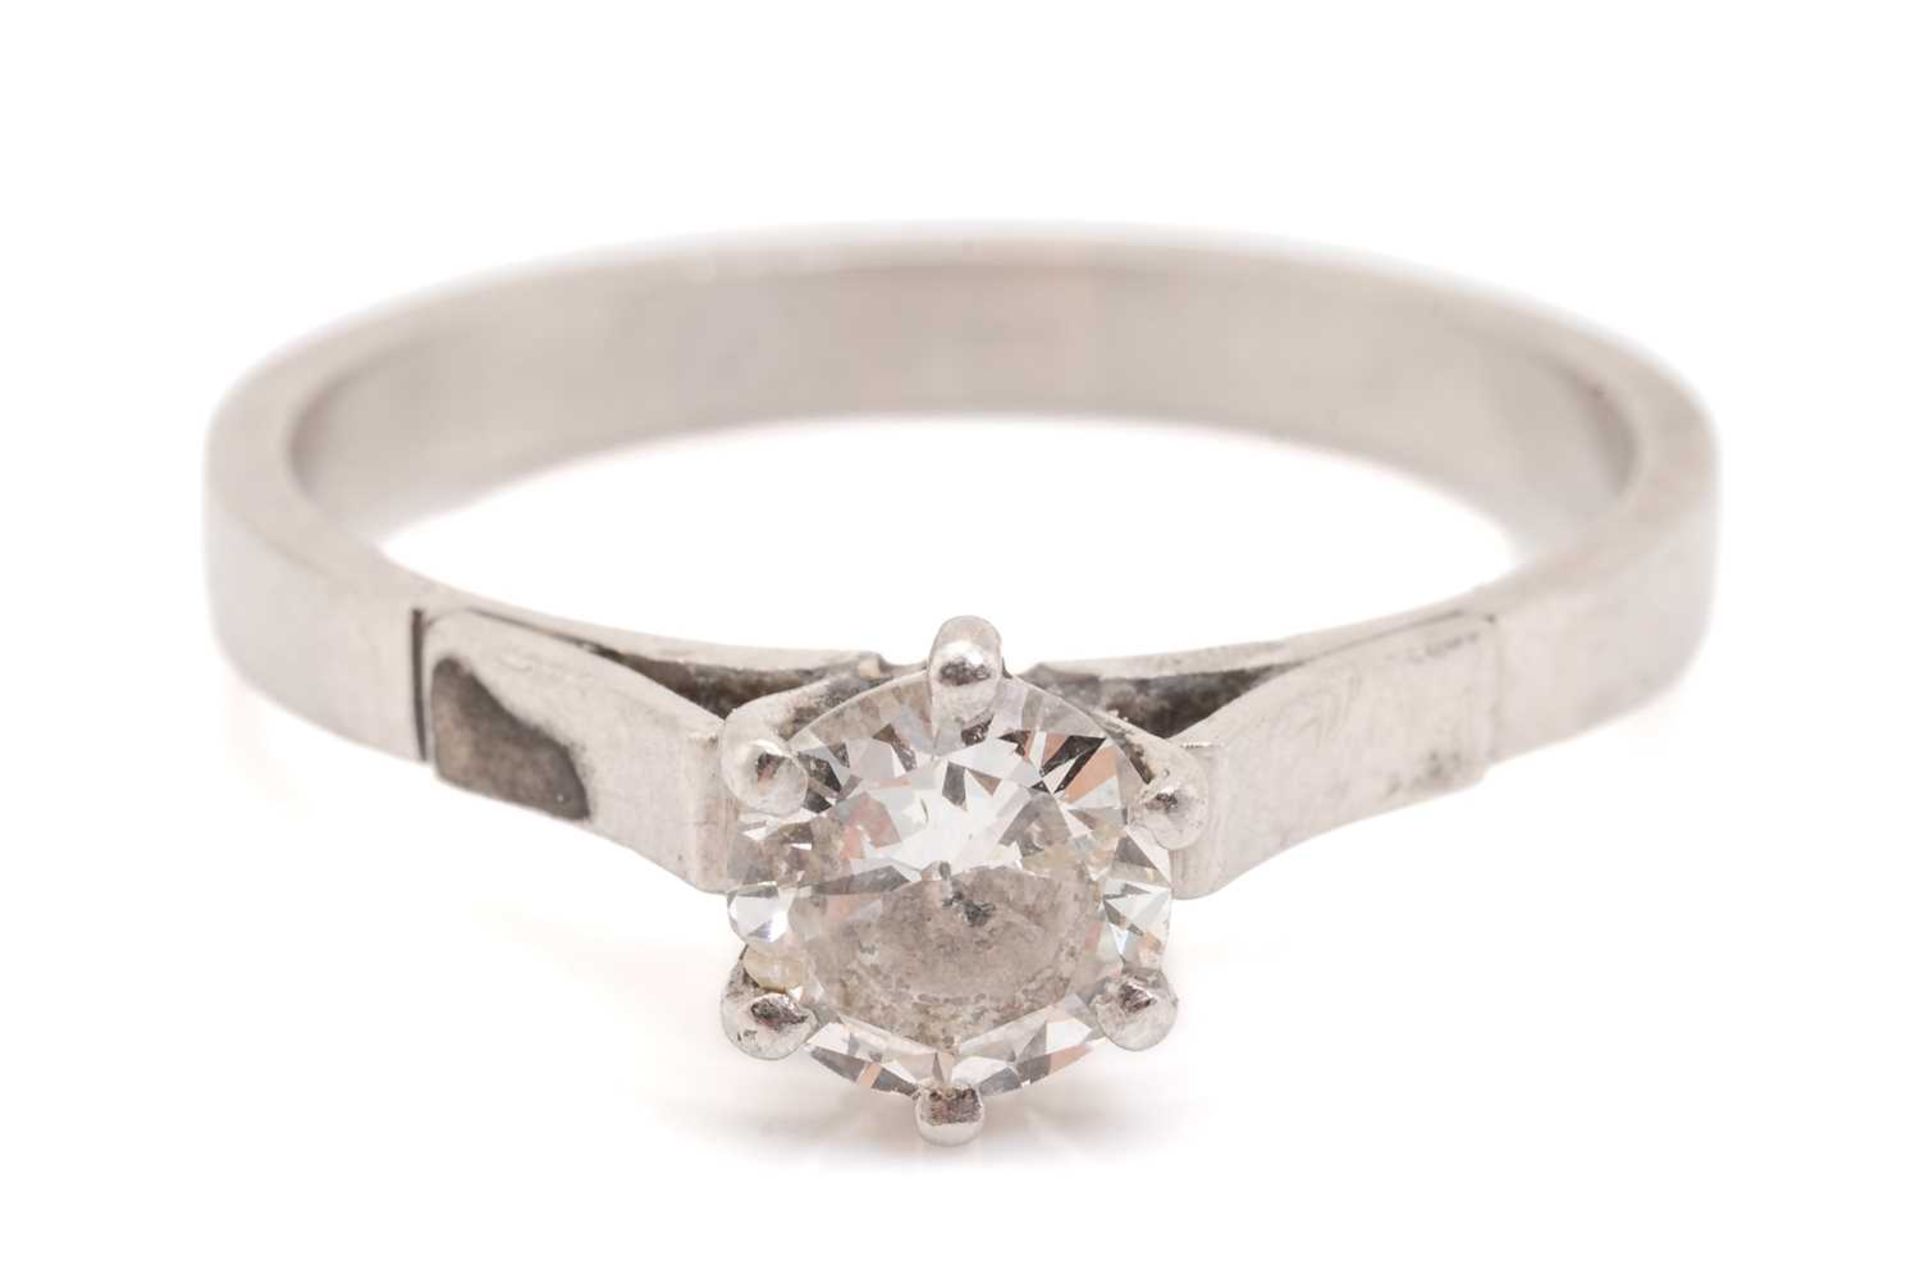 A diamond solitaire ring in platinum, comprising a brilliant-cut diamond in a high-profile six-claws